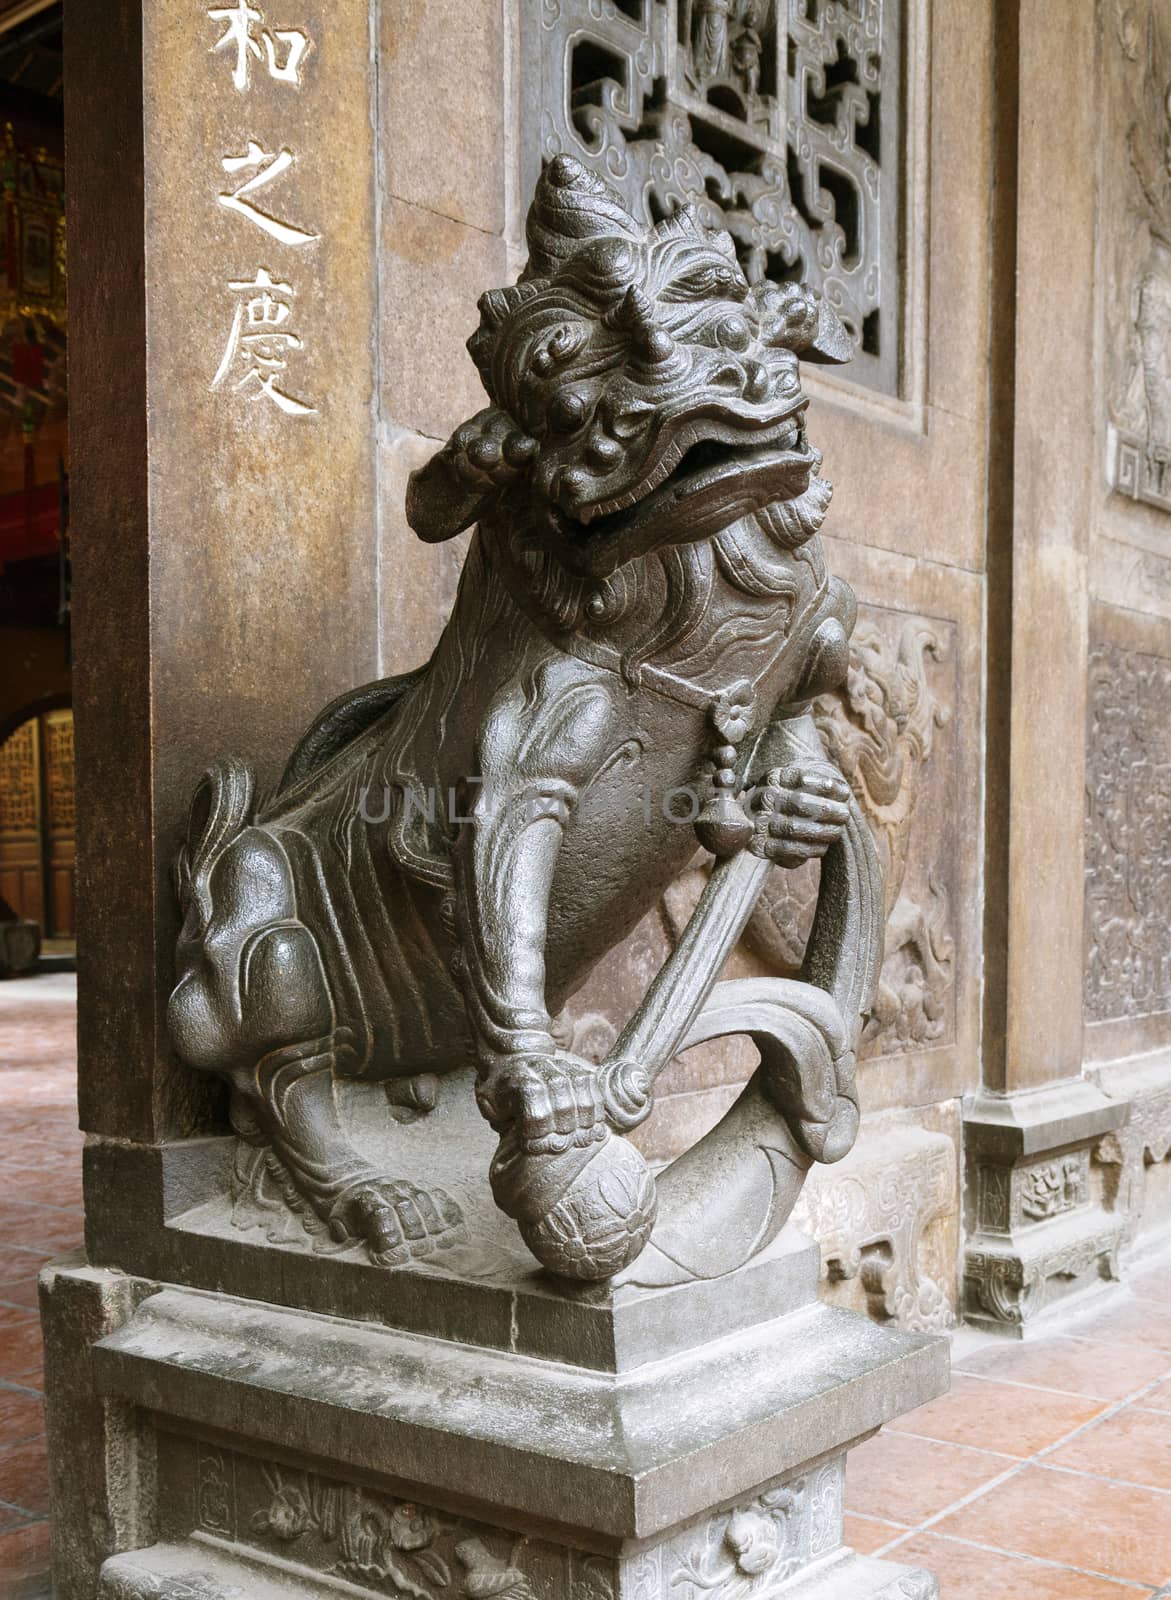 Chinese lion at the entrance of a temple by Goodday